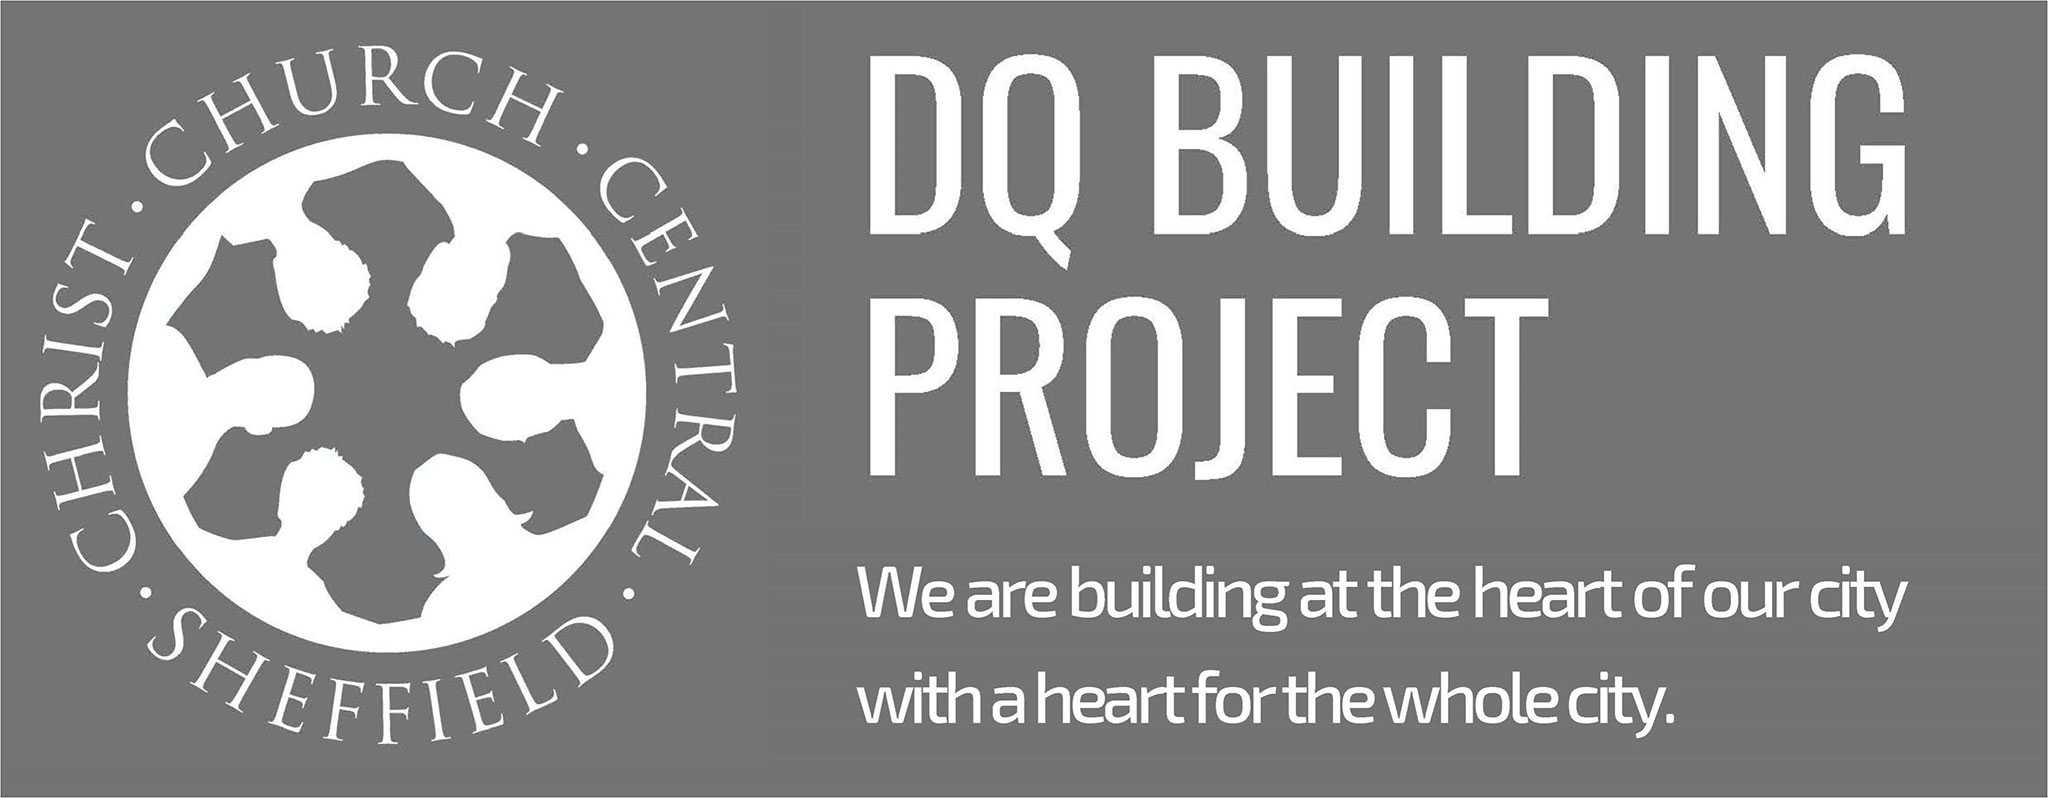 DQ Building Project